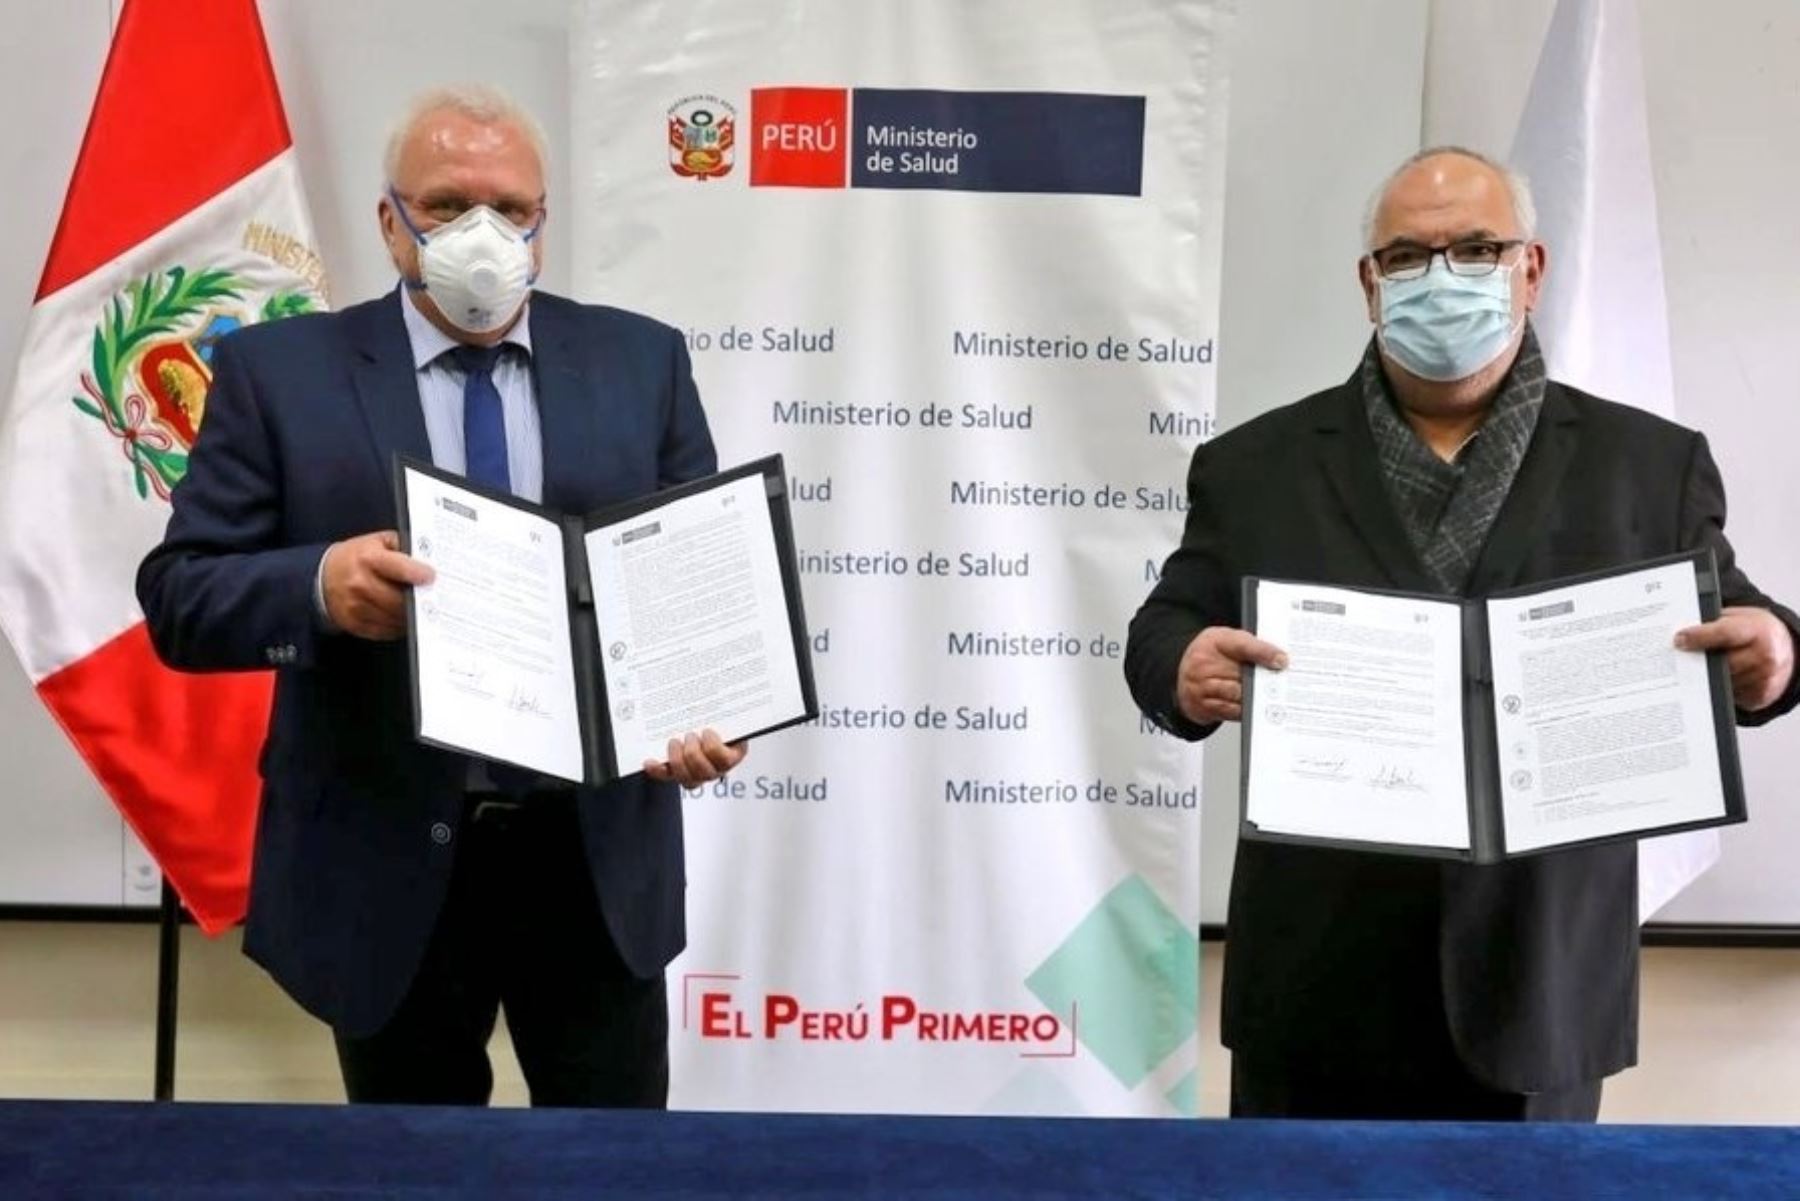 The Ministry of Health (Minsa) and the German Agency for International Cooperation (GIZ) signed an inter-institutional cooperation agreement. Photo: Minsa